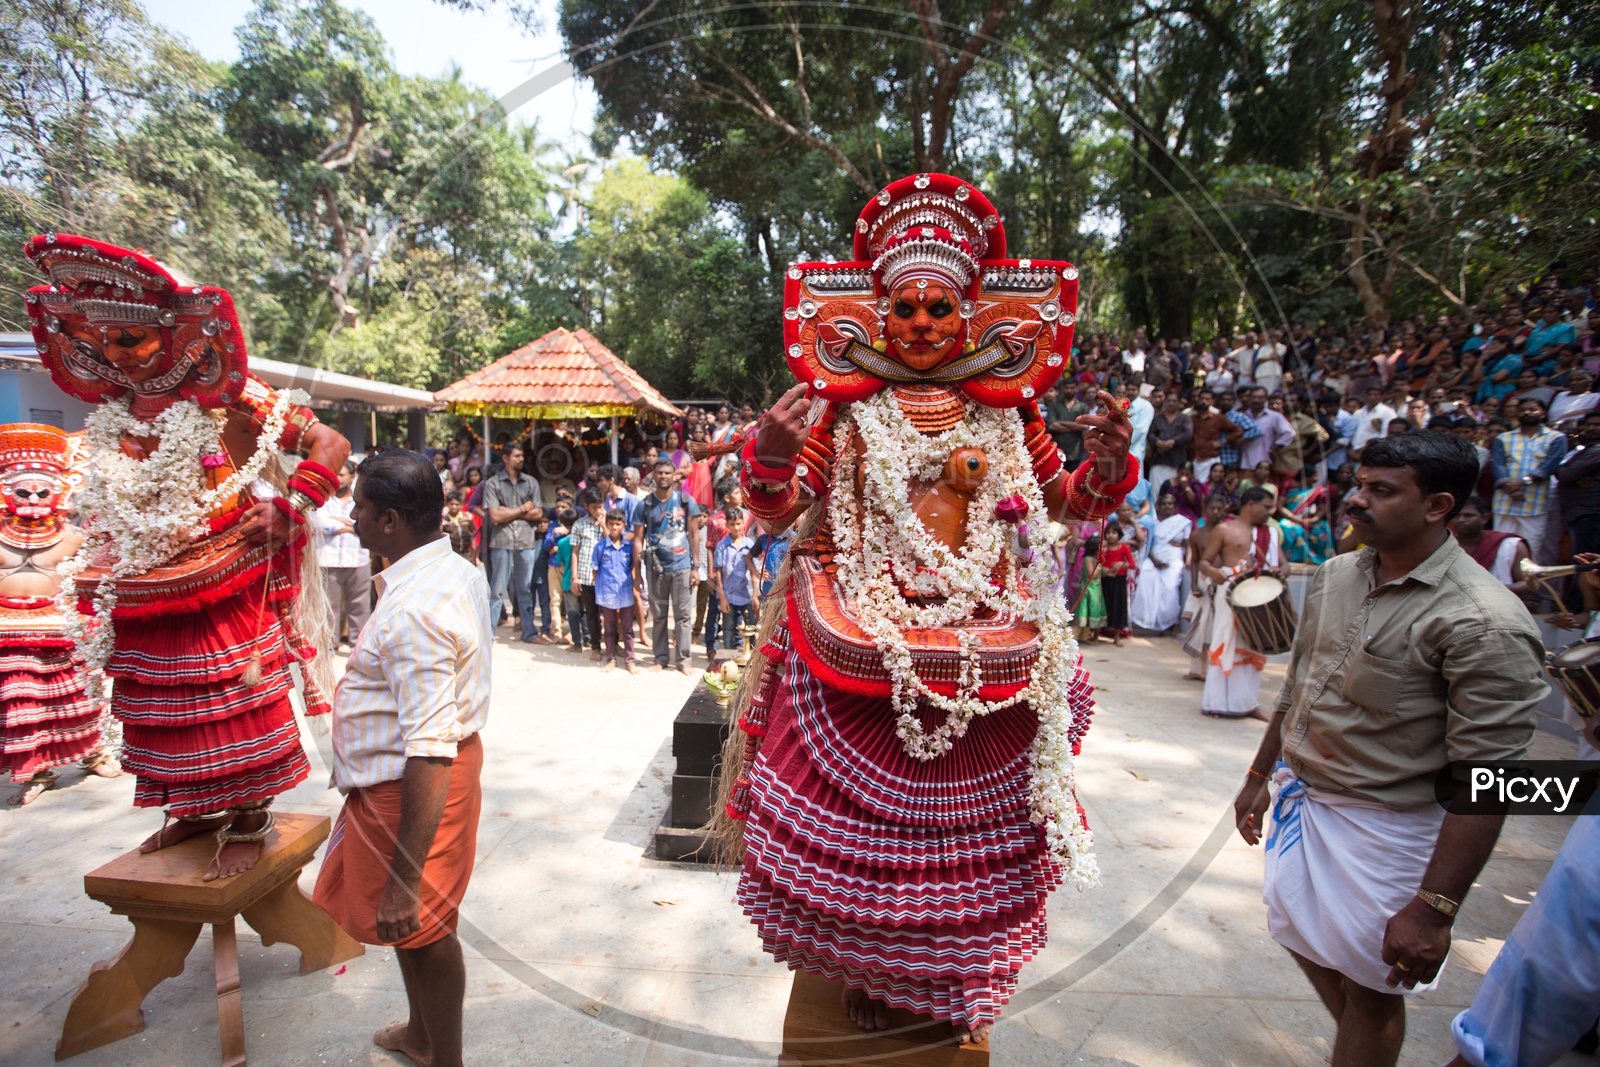 Performers in colourful costume during the performance of Theyyam